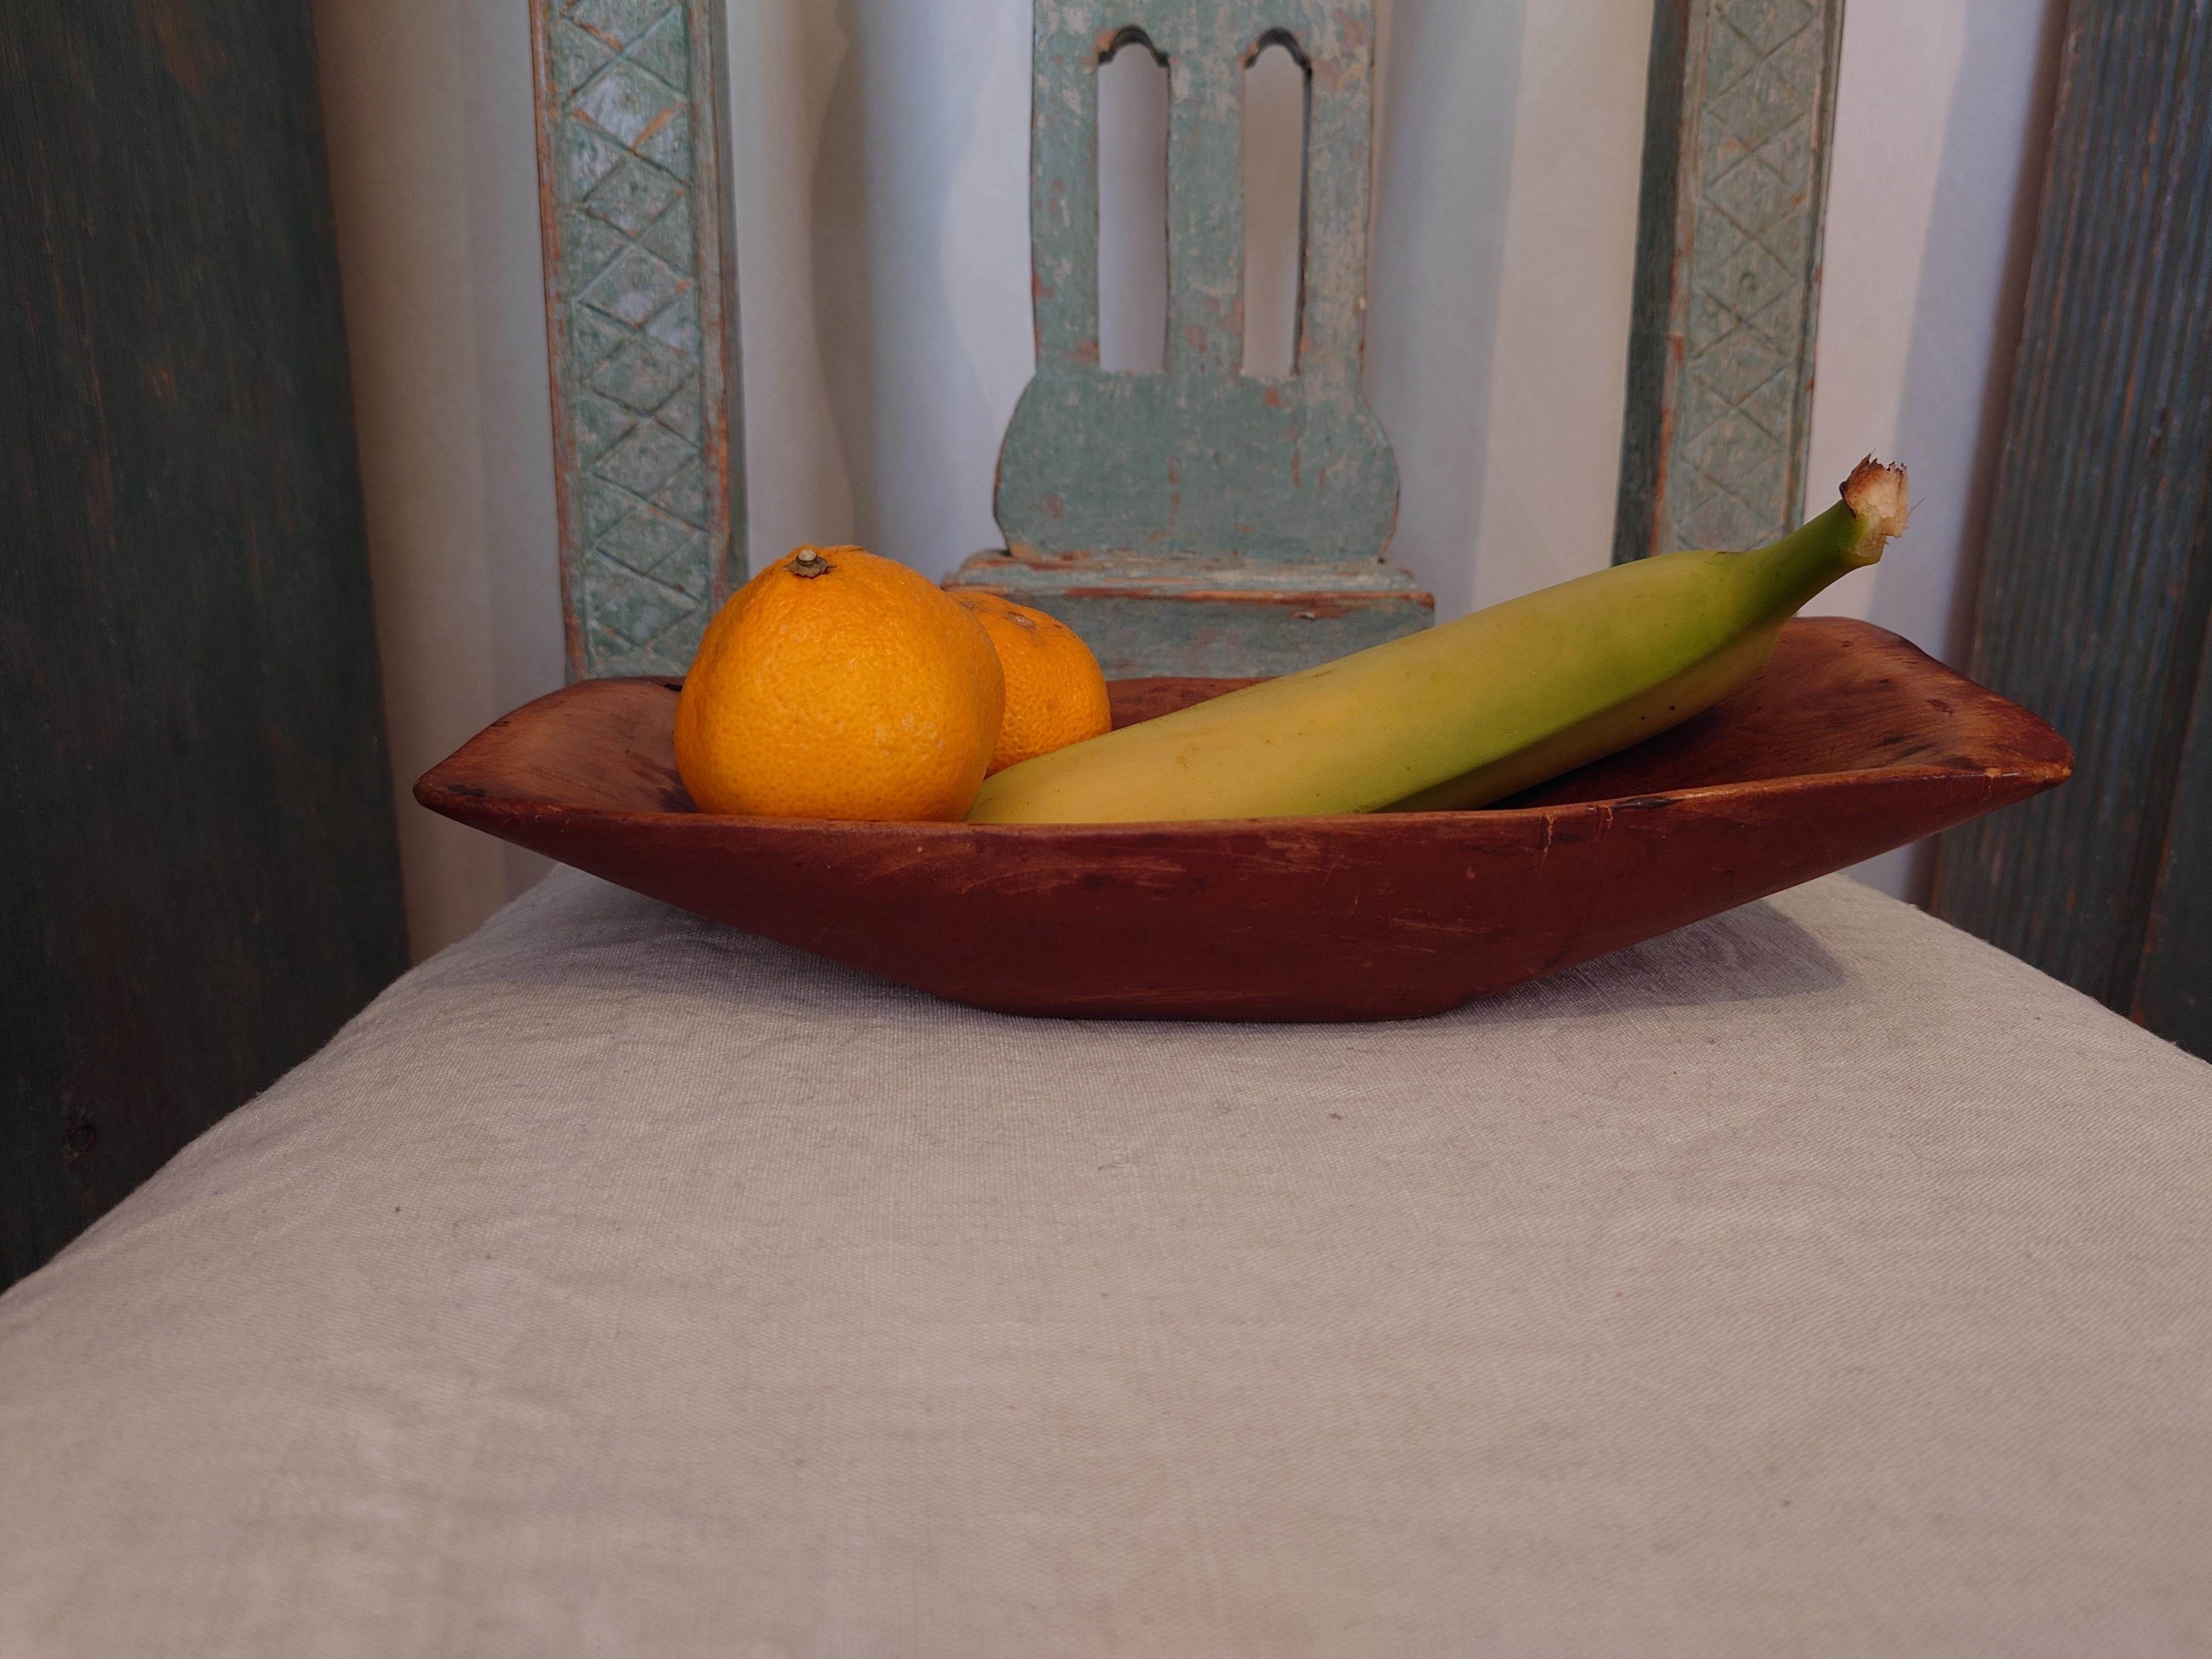 18th Century  unique small neat antique rustic  wooden tray / serving bowl with untouched original paint in beautiful English red.
The tray is dated 1792.
A farmers handcrafted tray or serving bowl or centerpiece.
A highly functional object with